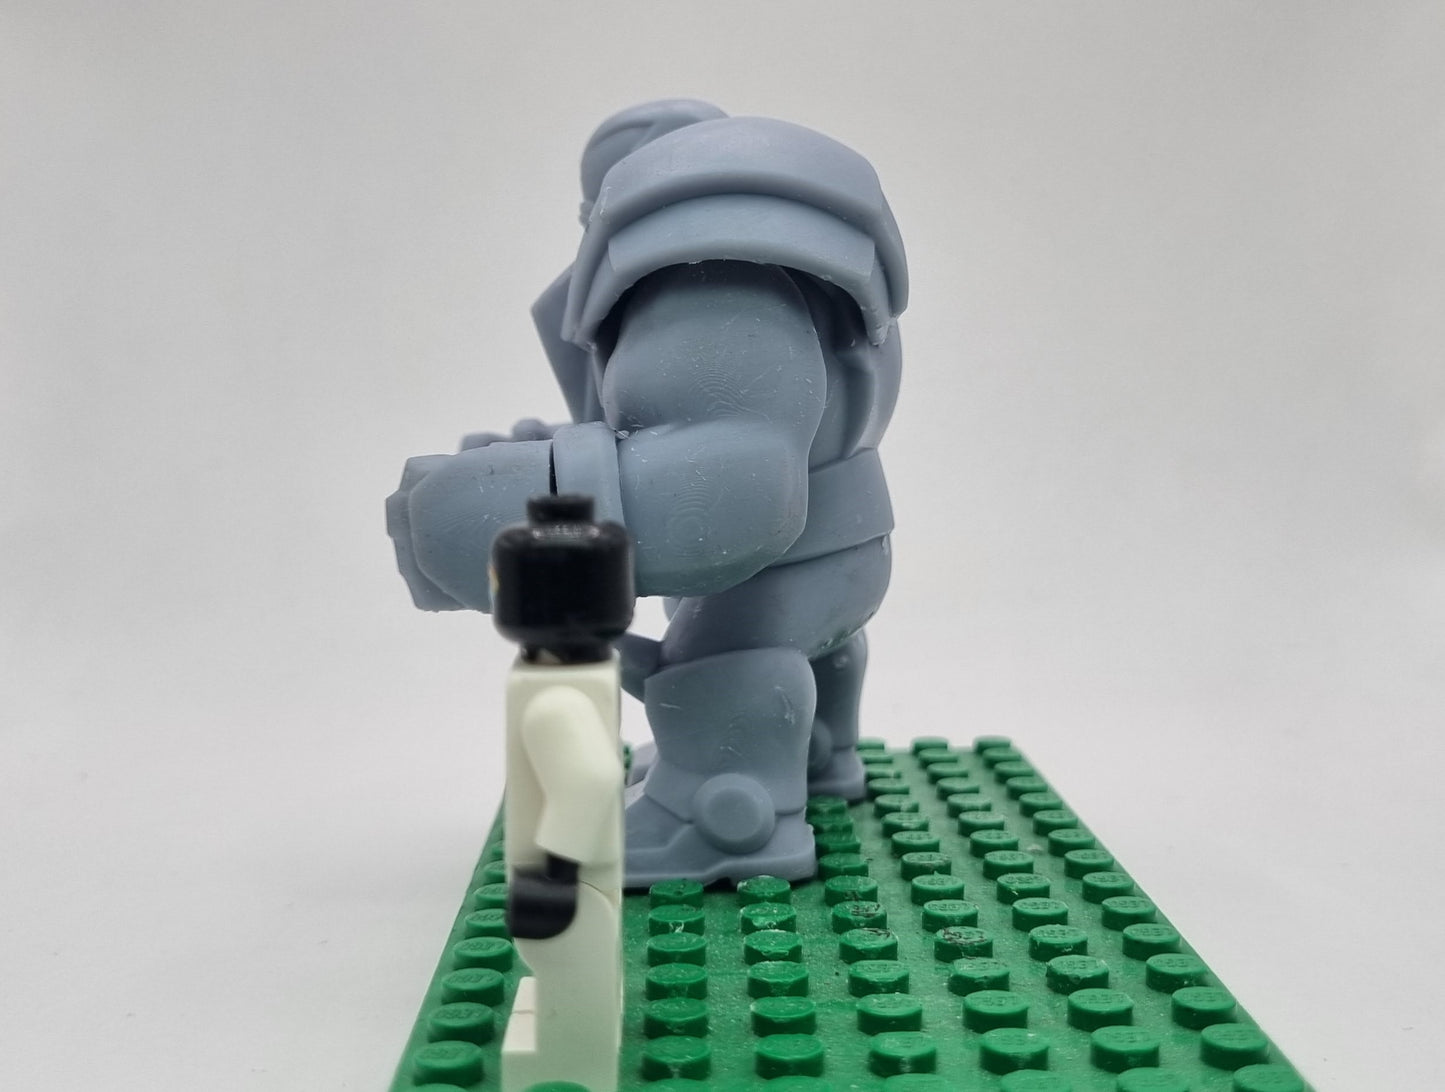 Building toy custom 3D printed super hero ancient mutated god!